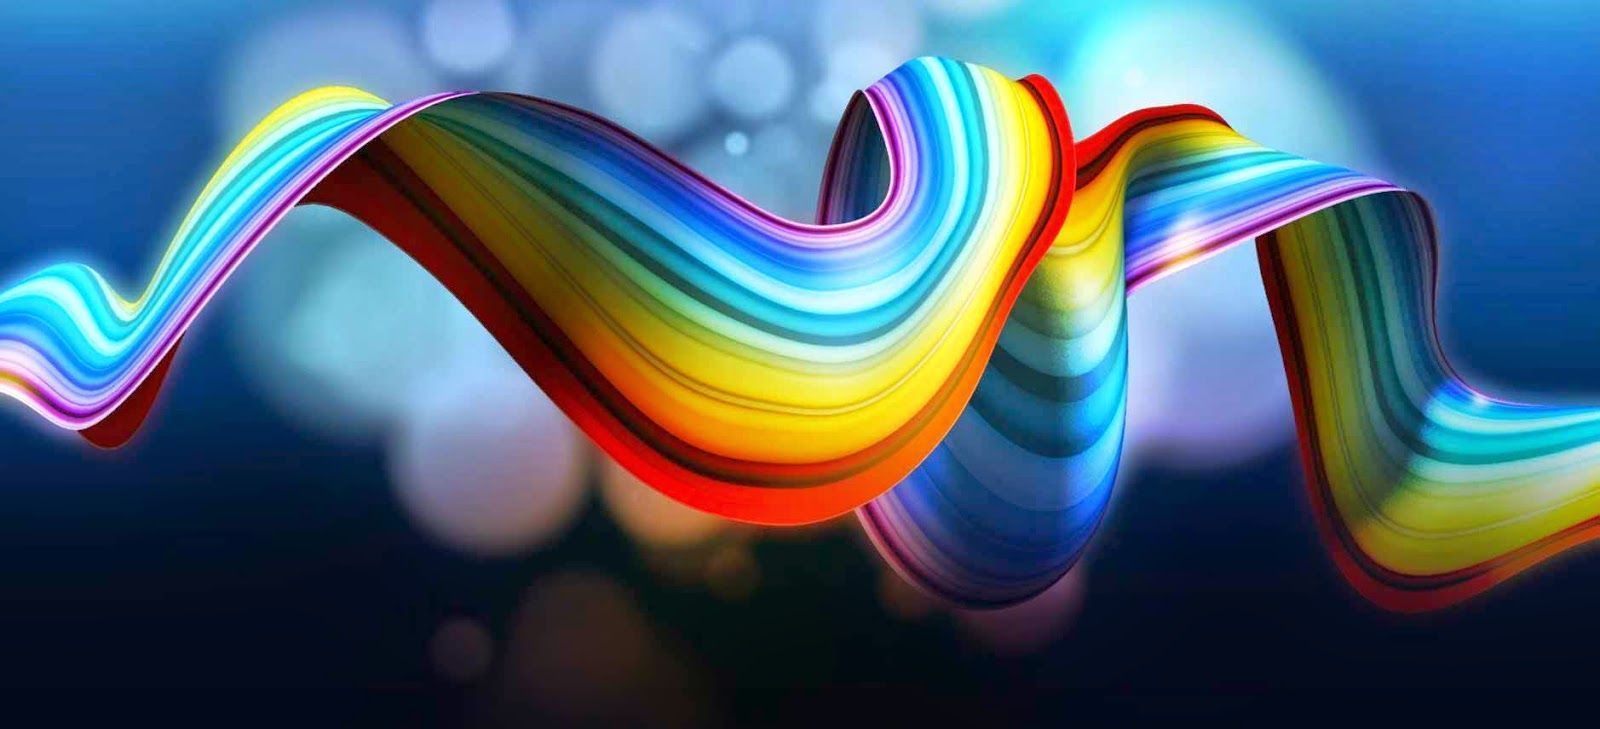 35+ Excellent Color Spectrum and Rainbow Wallpapers | Tinydesignr